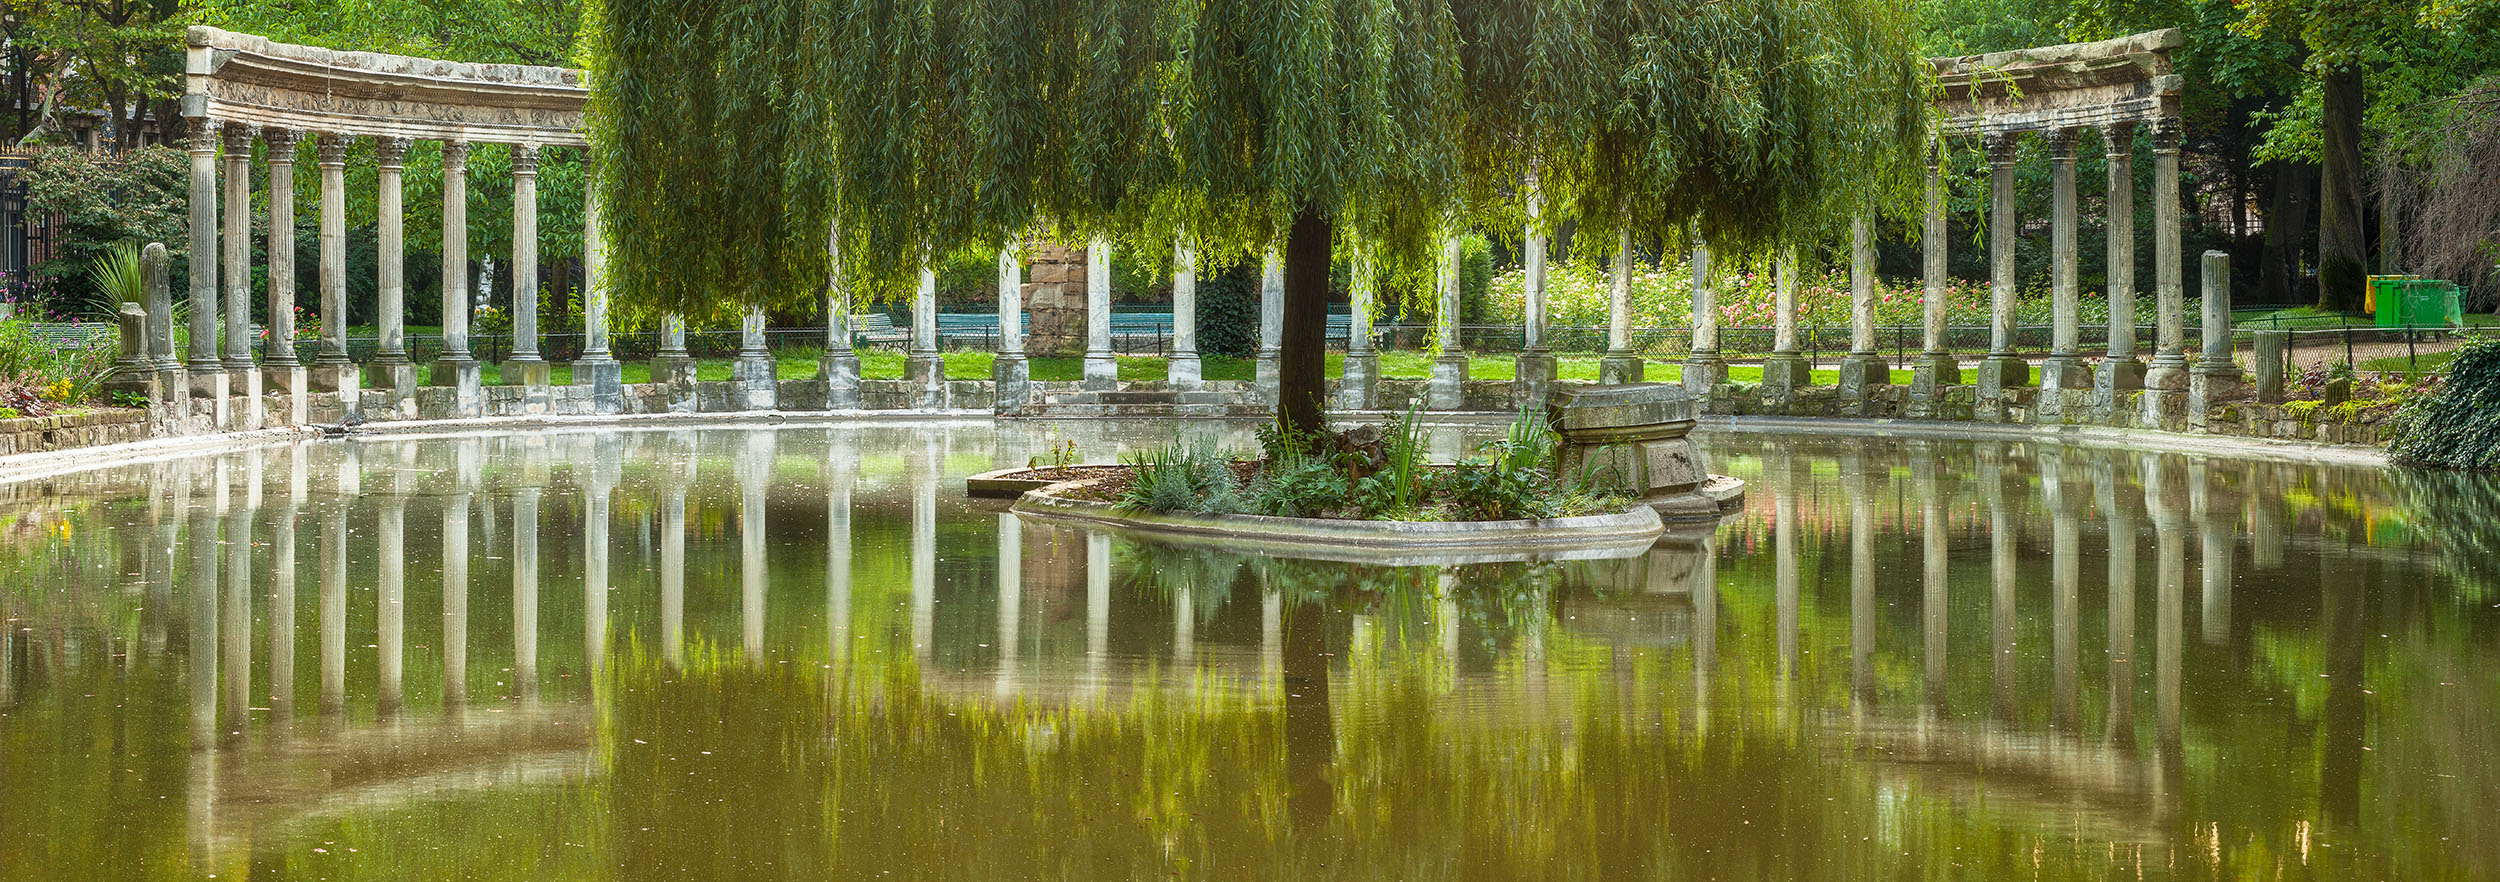 "Reflections at Parc Monceau" is a panoramic image captured from the serene Parc Monceau in the heart of Paris, France. At its...